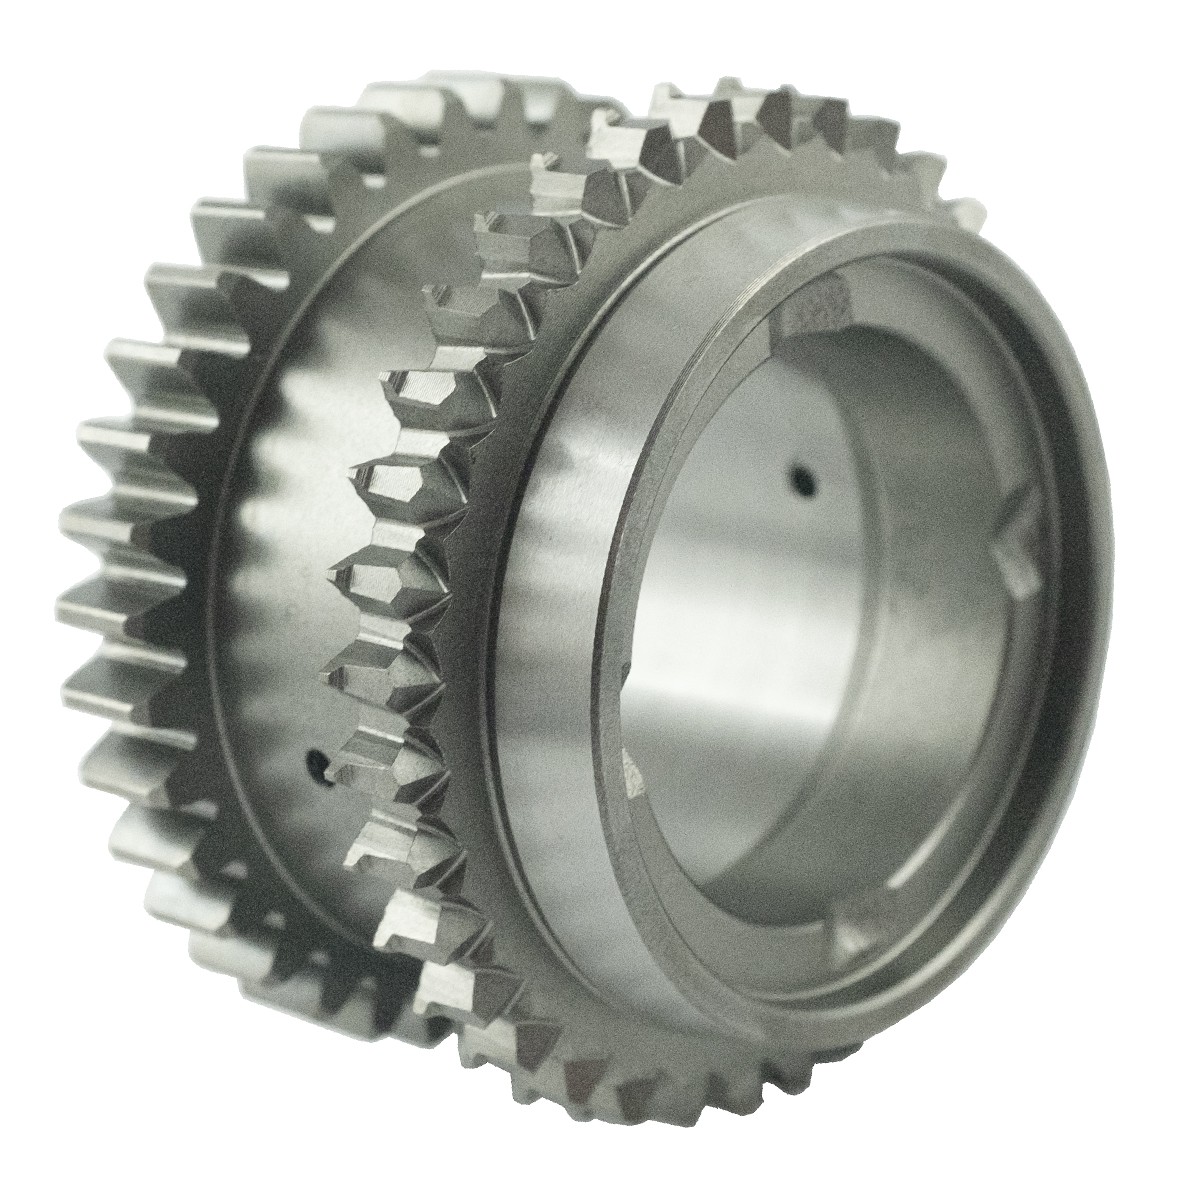 Sprocket for gear LS MT3.35 Tractor / MT3.40 / DRV-TRG281 / 40009146 / A1281653